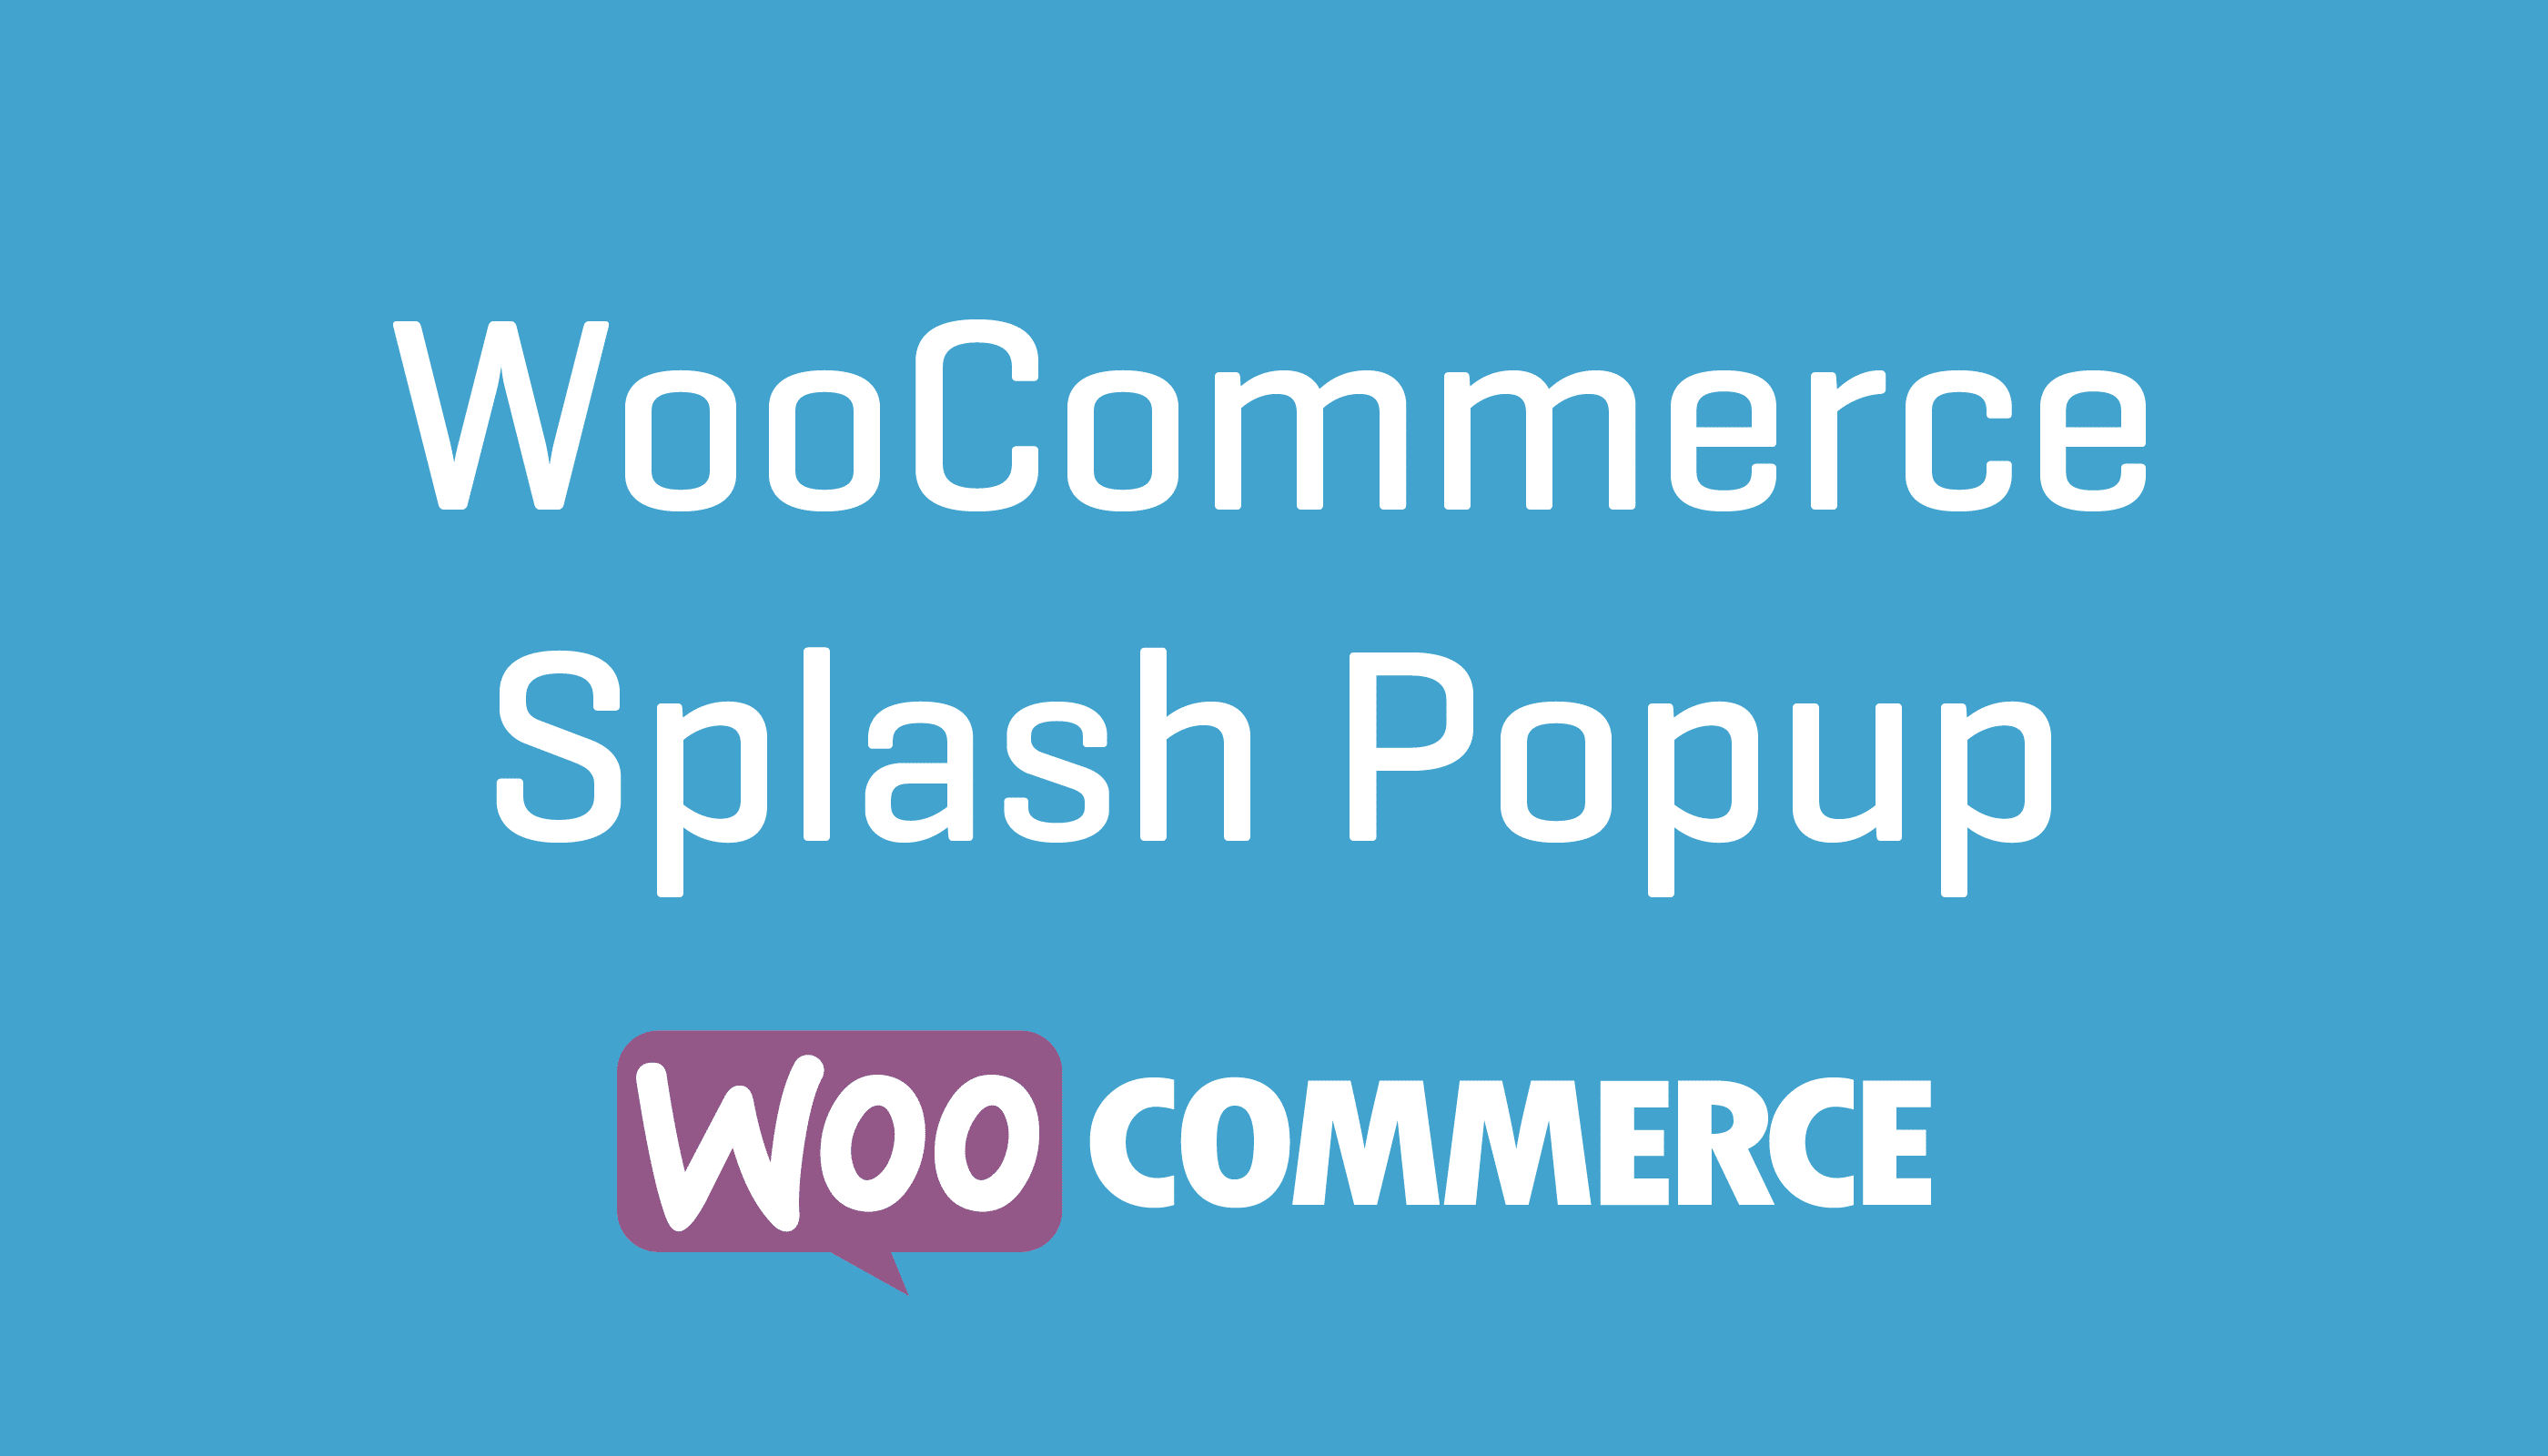 WooCommerce Splash Popup - WooCommerce Splash Popup v1.5.1 by Woocommerce Nulled Free Download